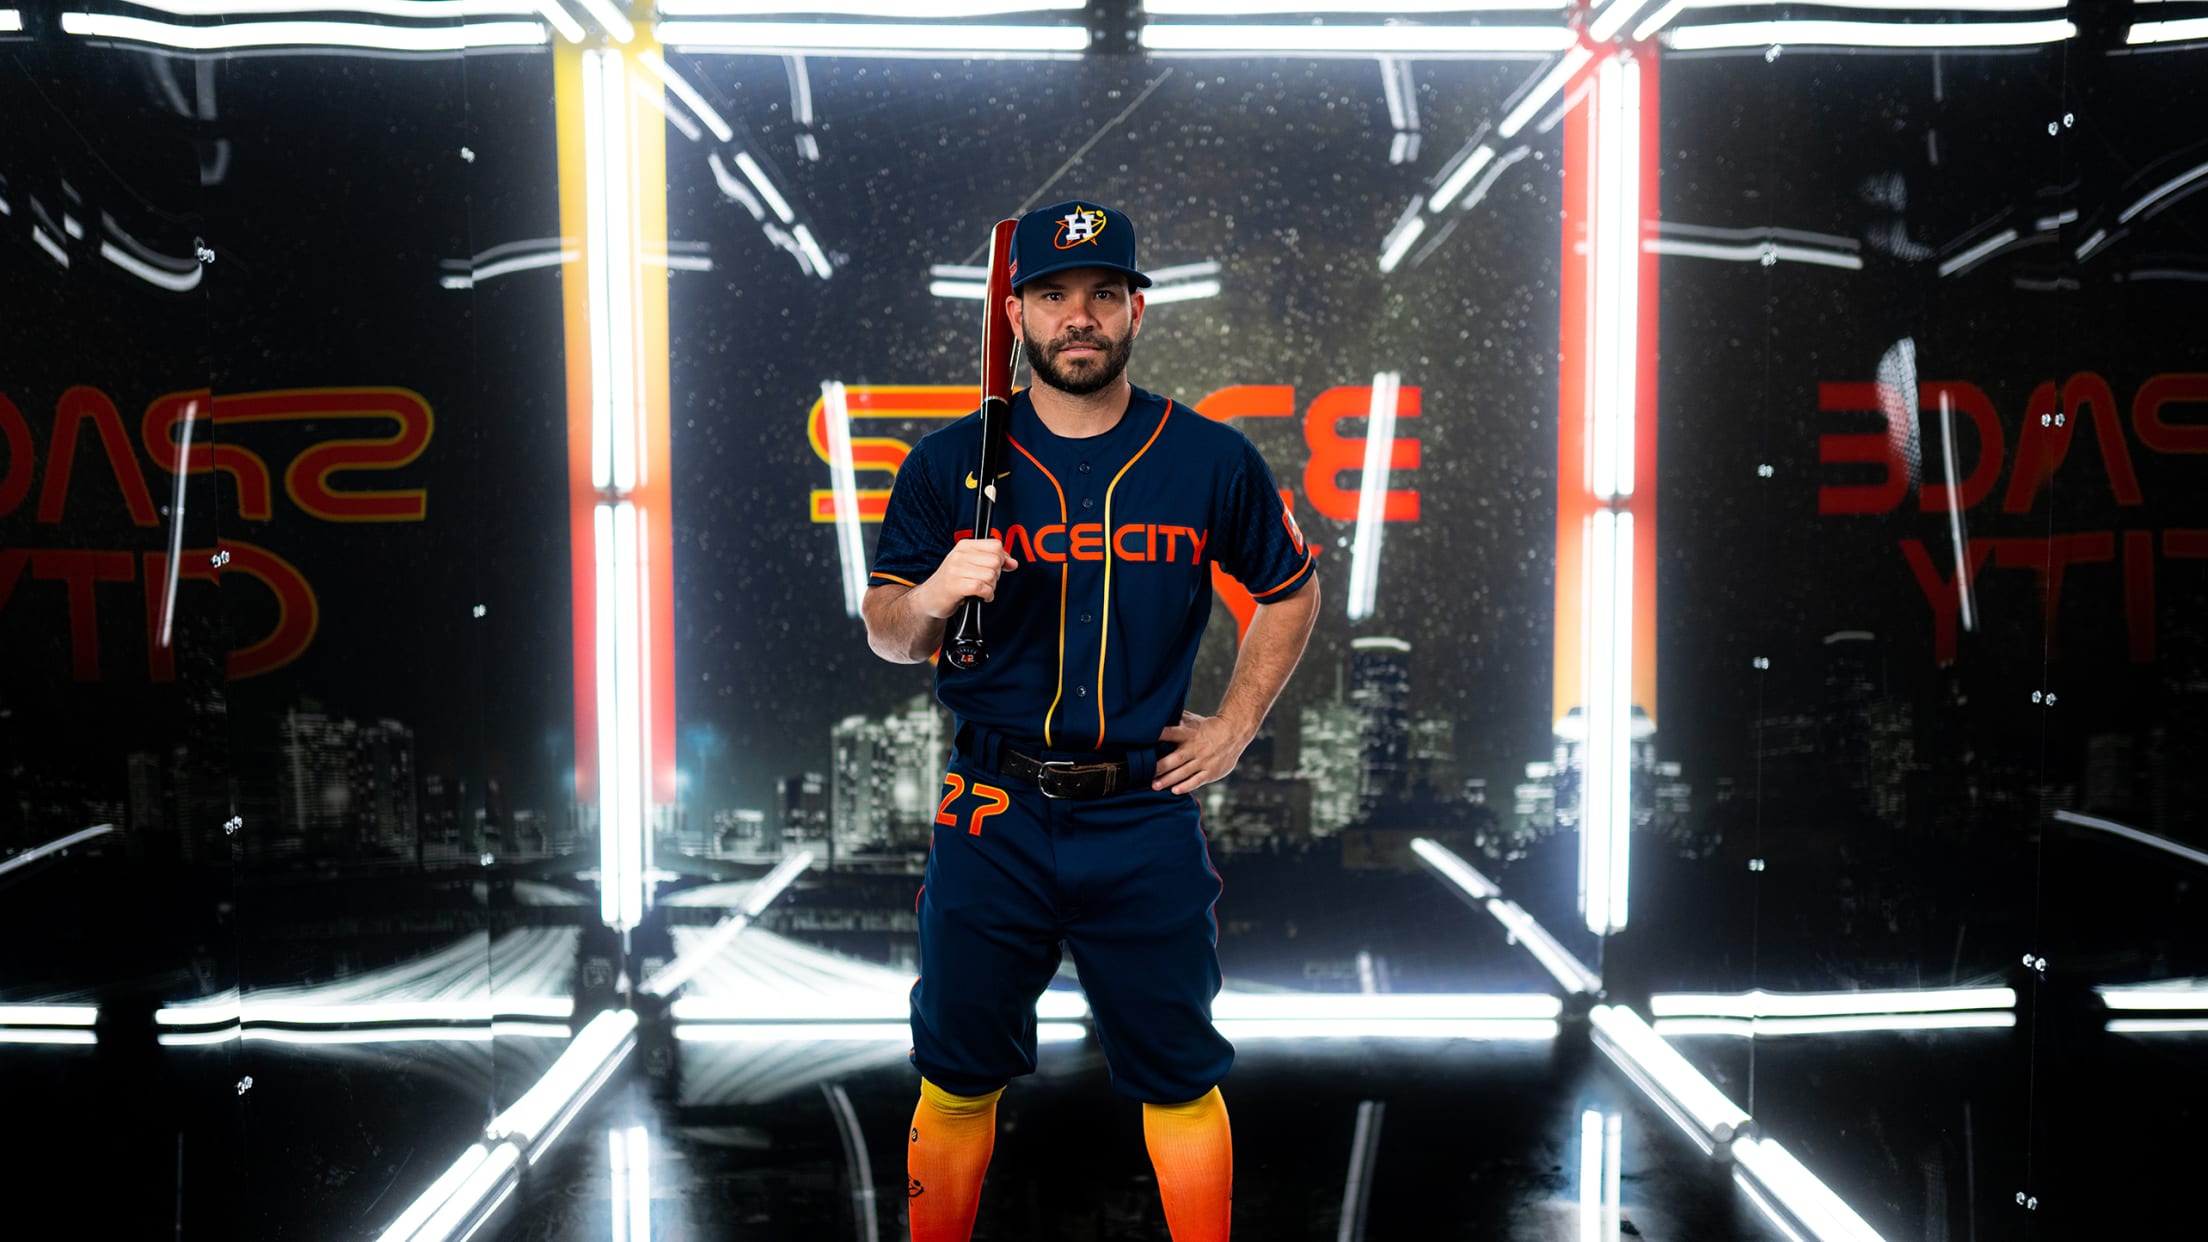 What Are the Houston Astros Colors